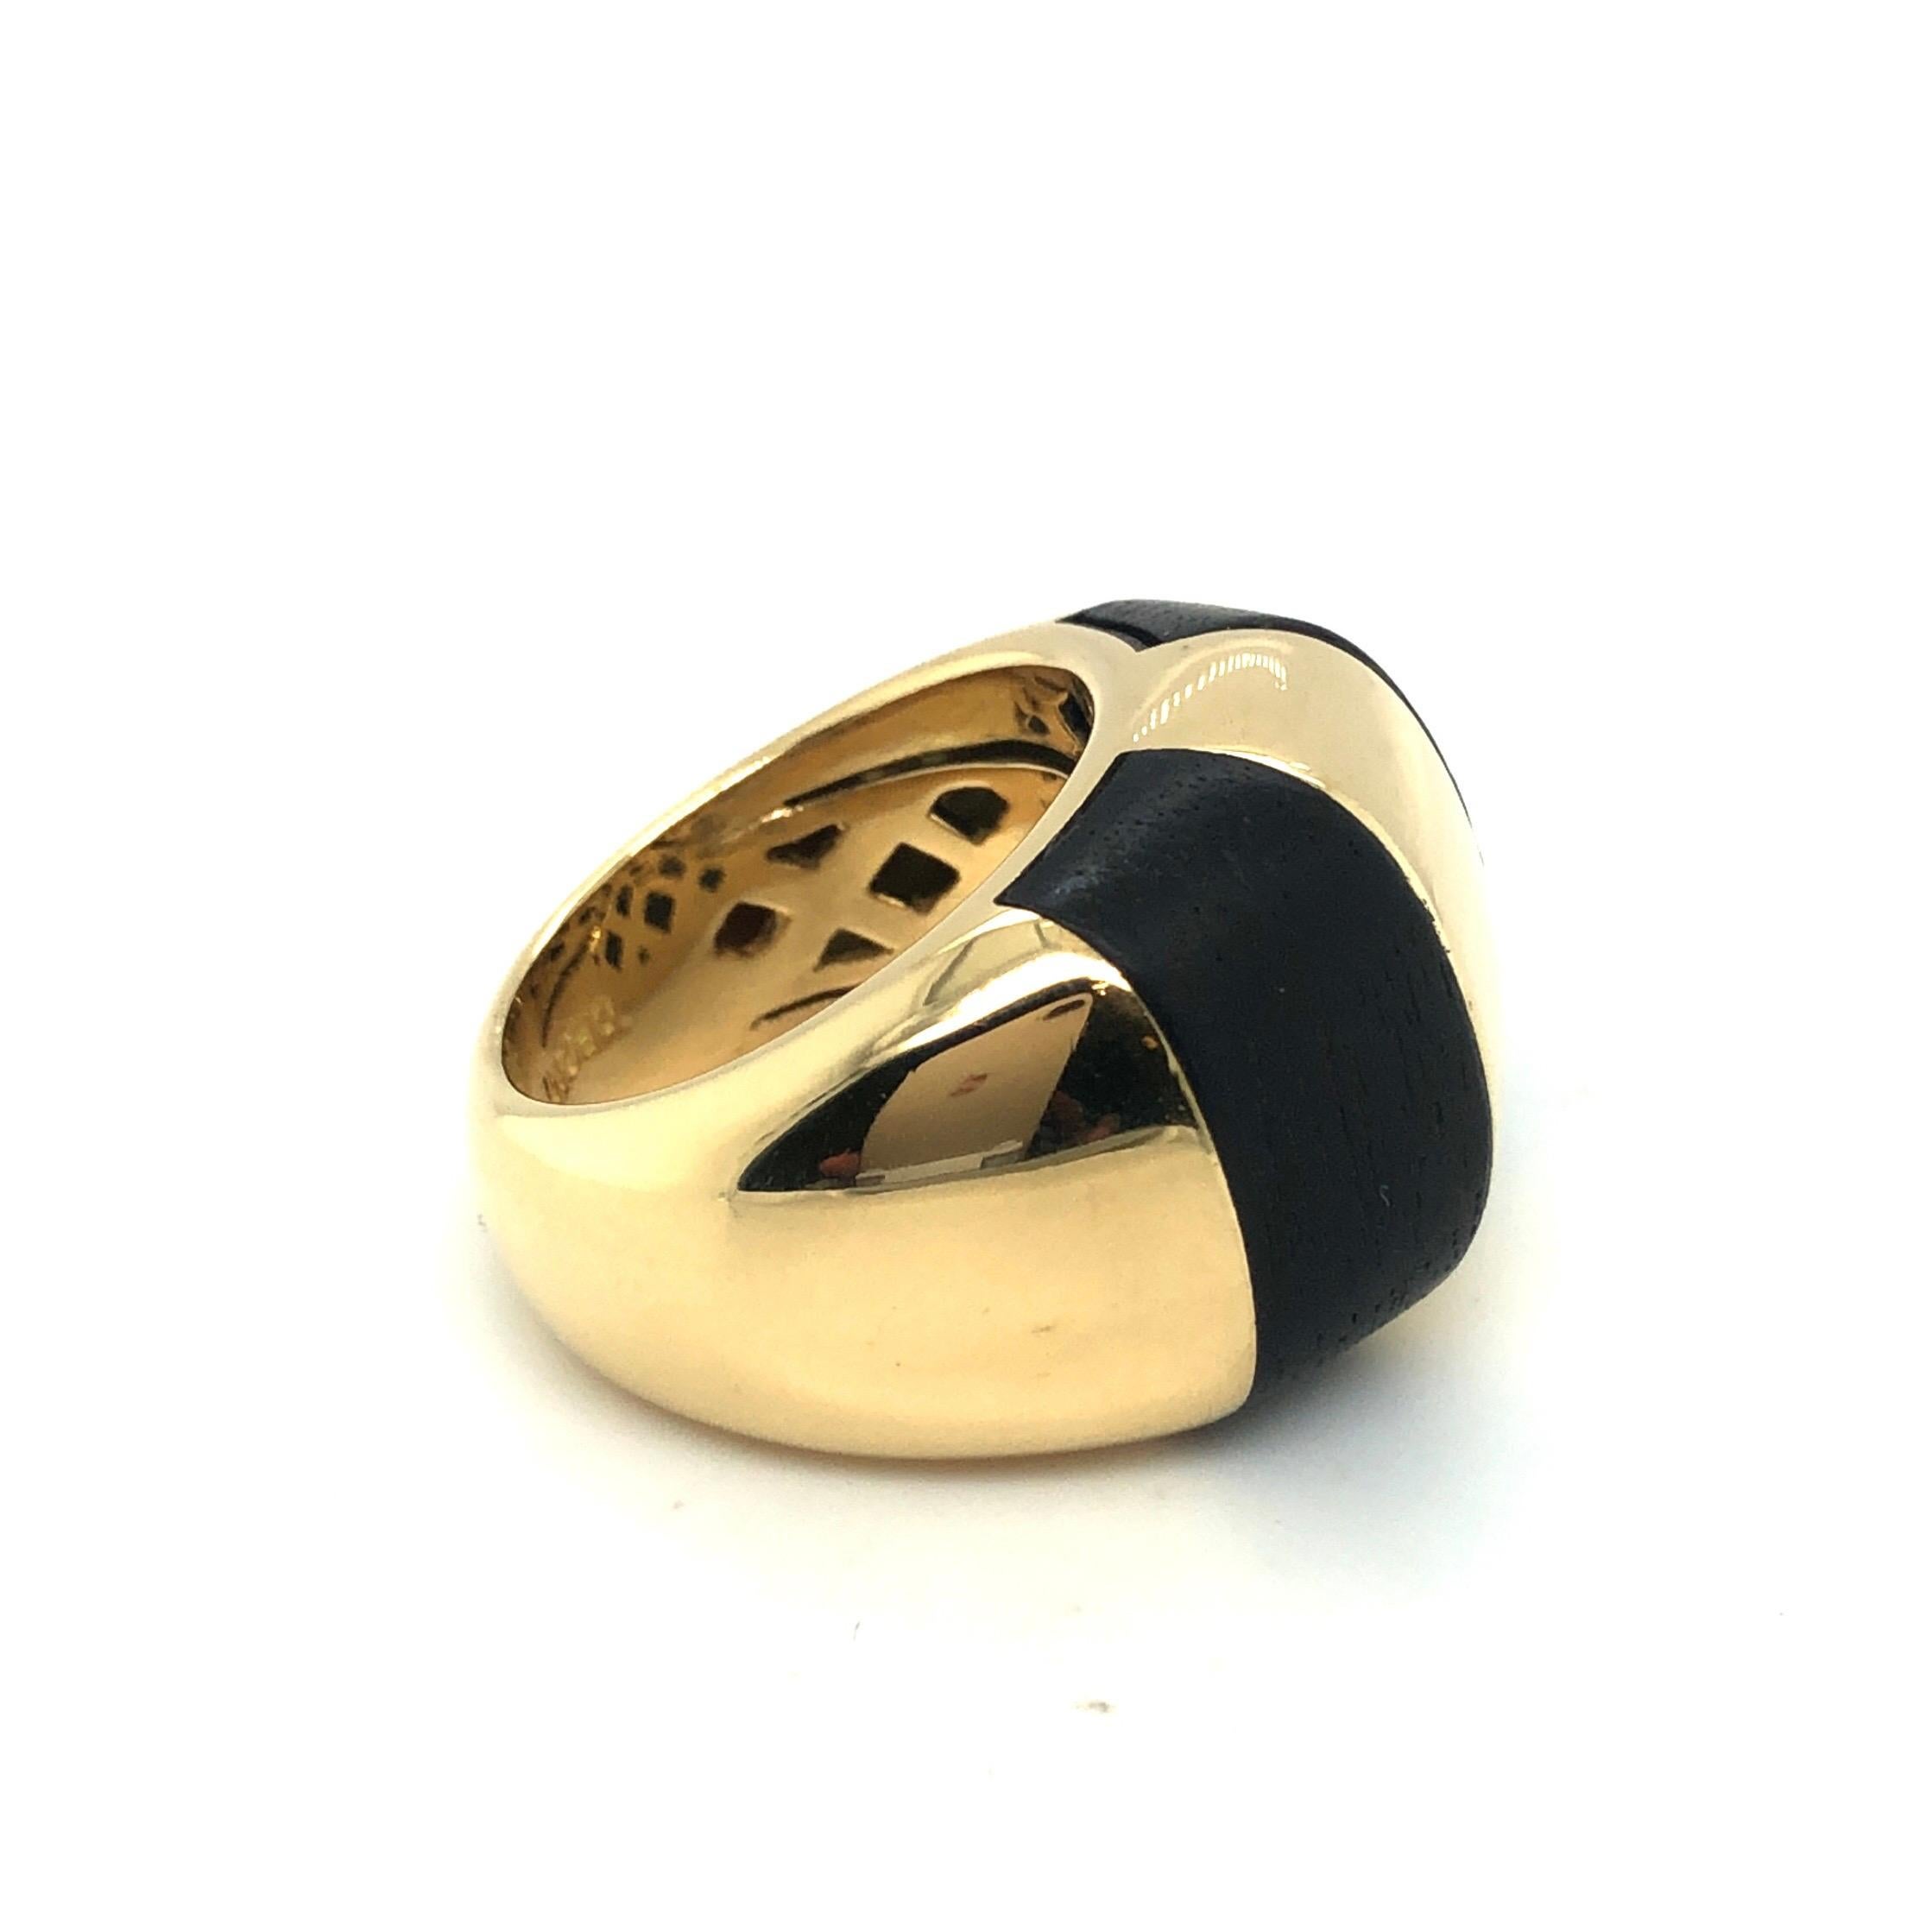 Striking 18 karat yellow gold and wood cocktail ring from the 1990s.
Crafted in 18 karat polished yellow gold, this statement ring is set with two ebony wood inlays. It has been recently professionally cleaned and polished and is therefore in